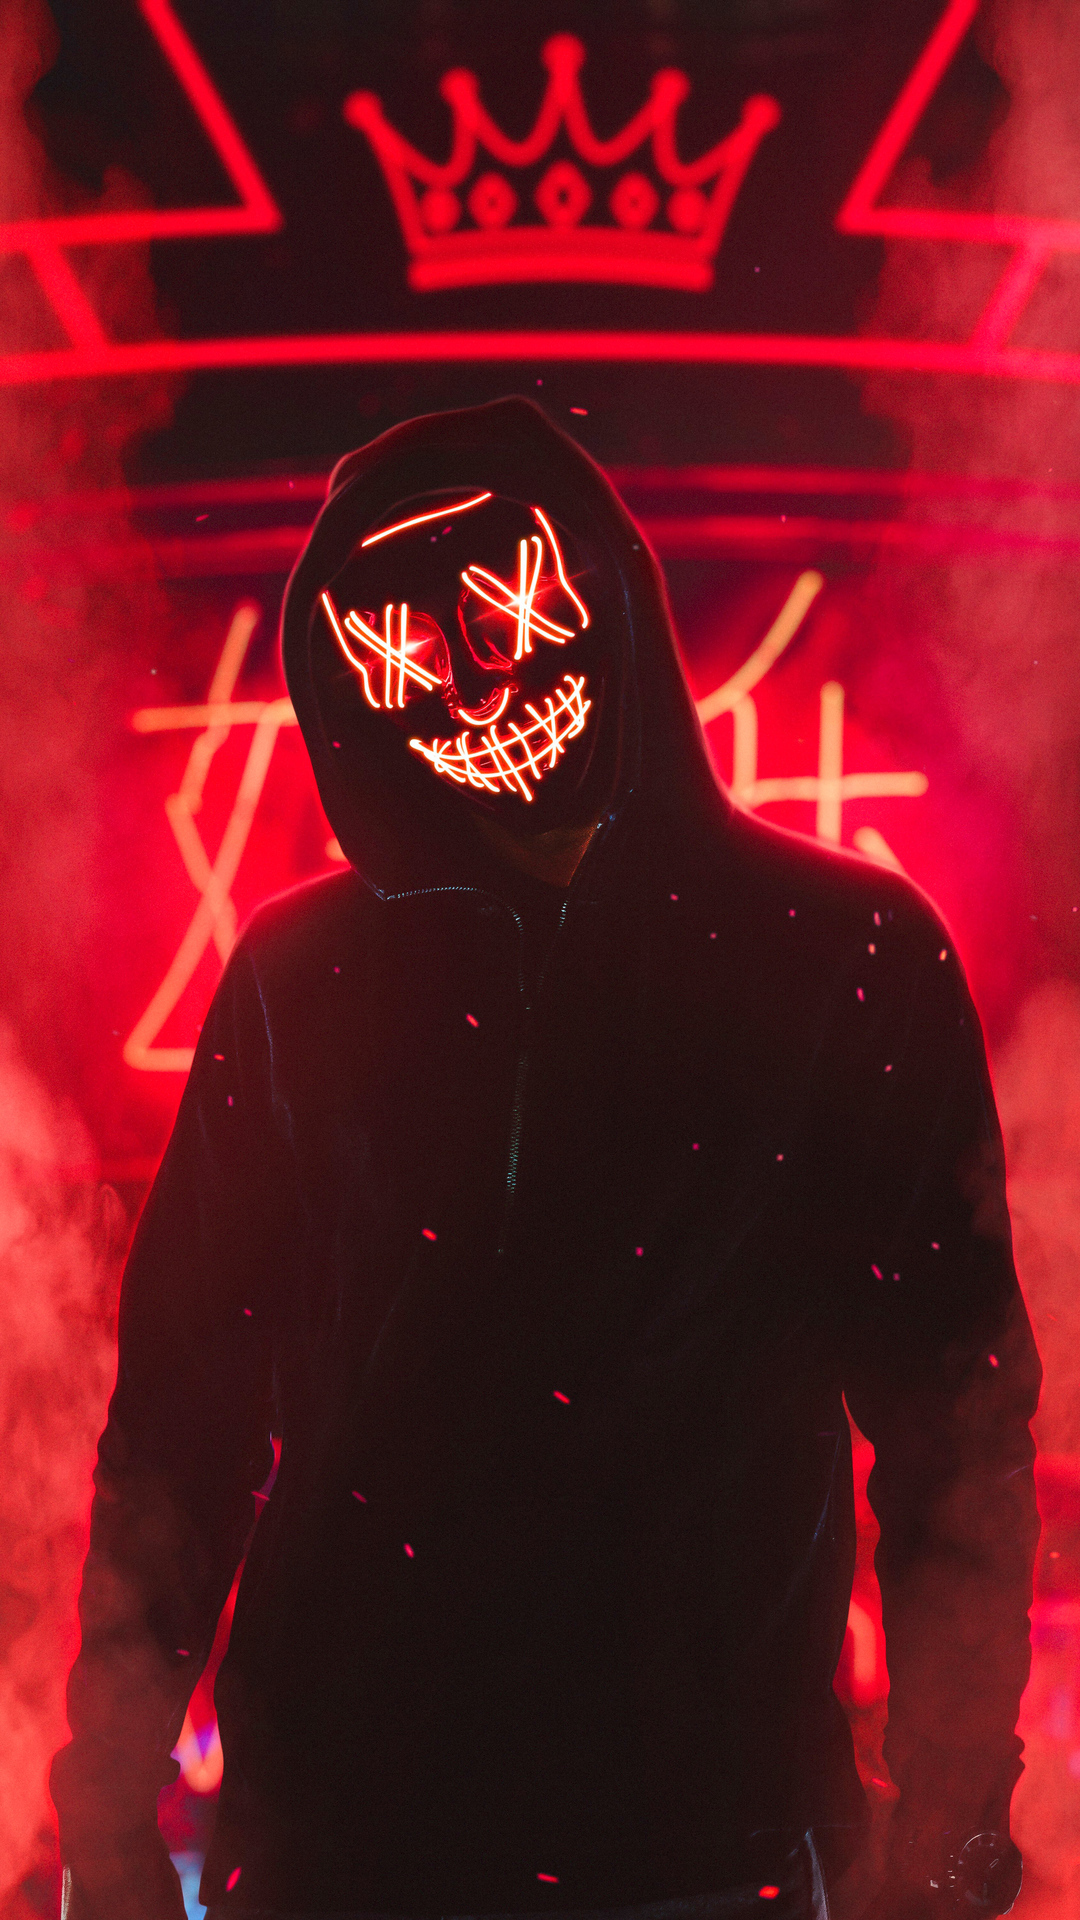 Cool Mask Wallpapers